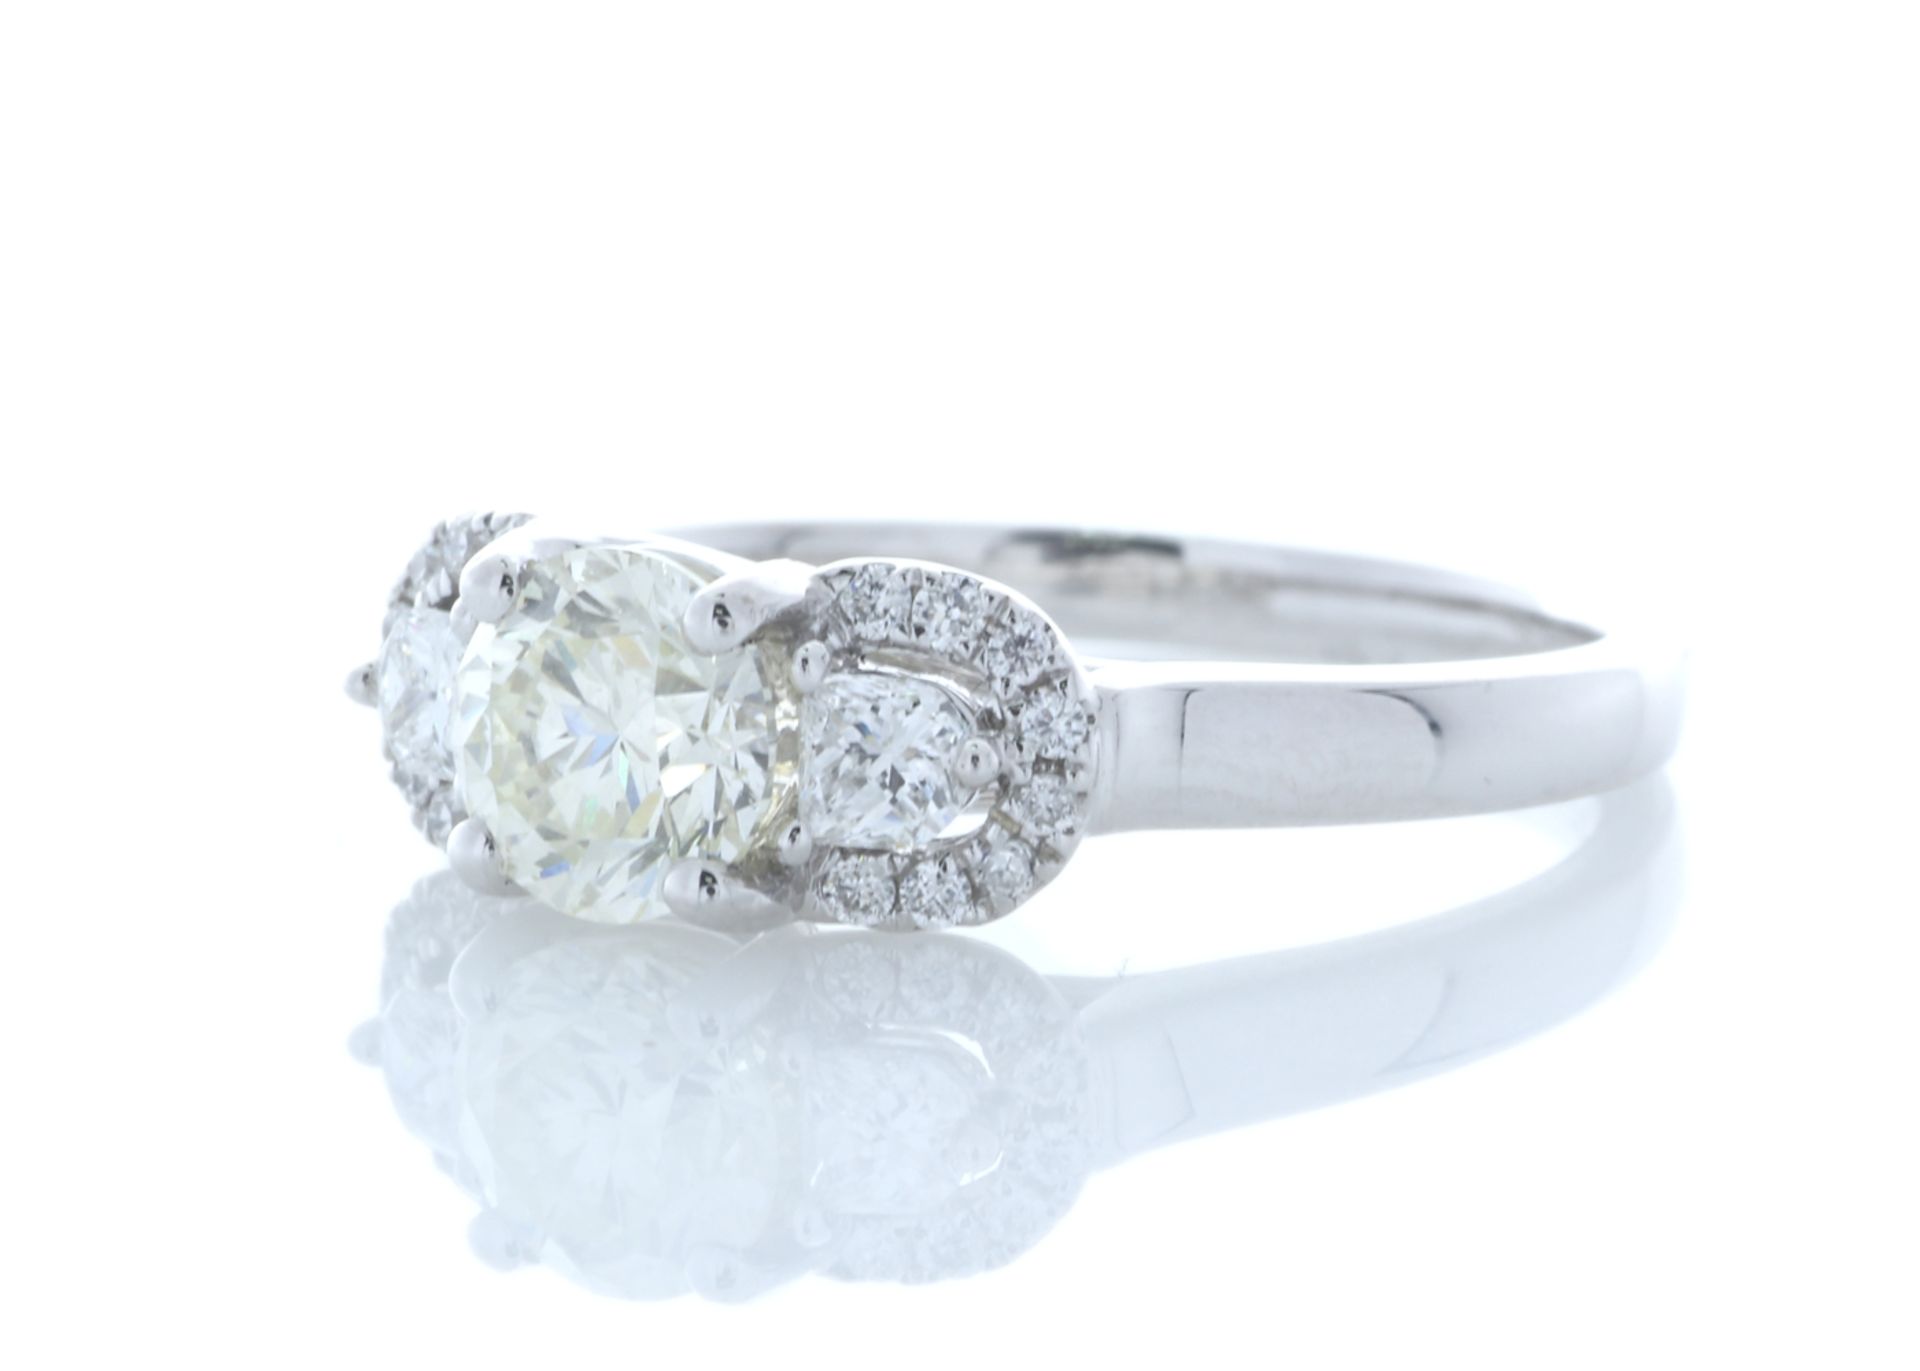 18ct White Gold Three Stone Claw Set Diamond Ring (0.75) 1.02 Carats - Valued By IDI £17,425.00 - - Image 2 of 5